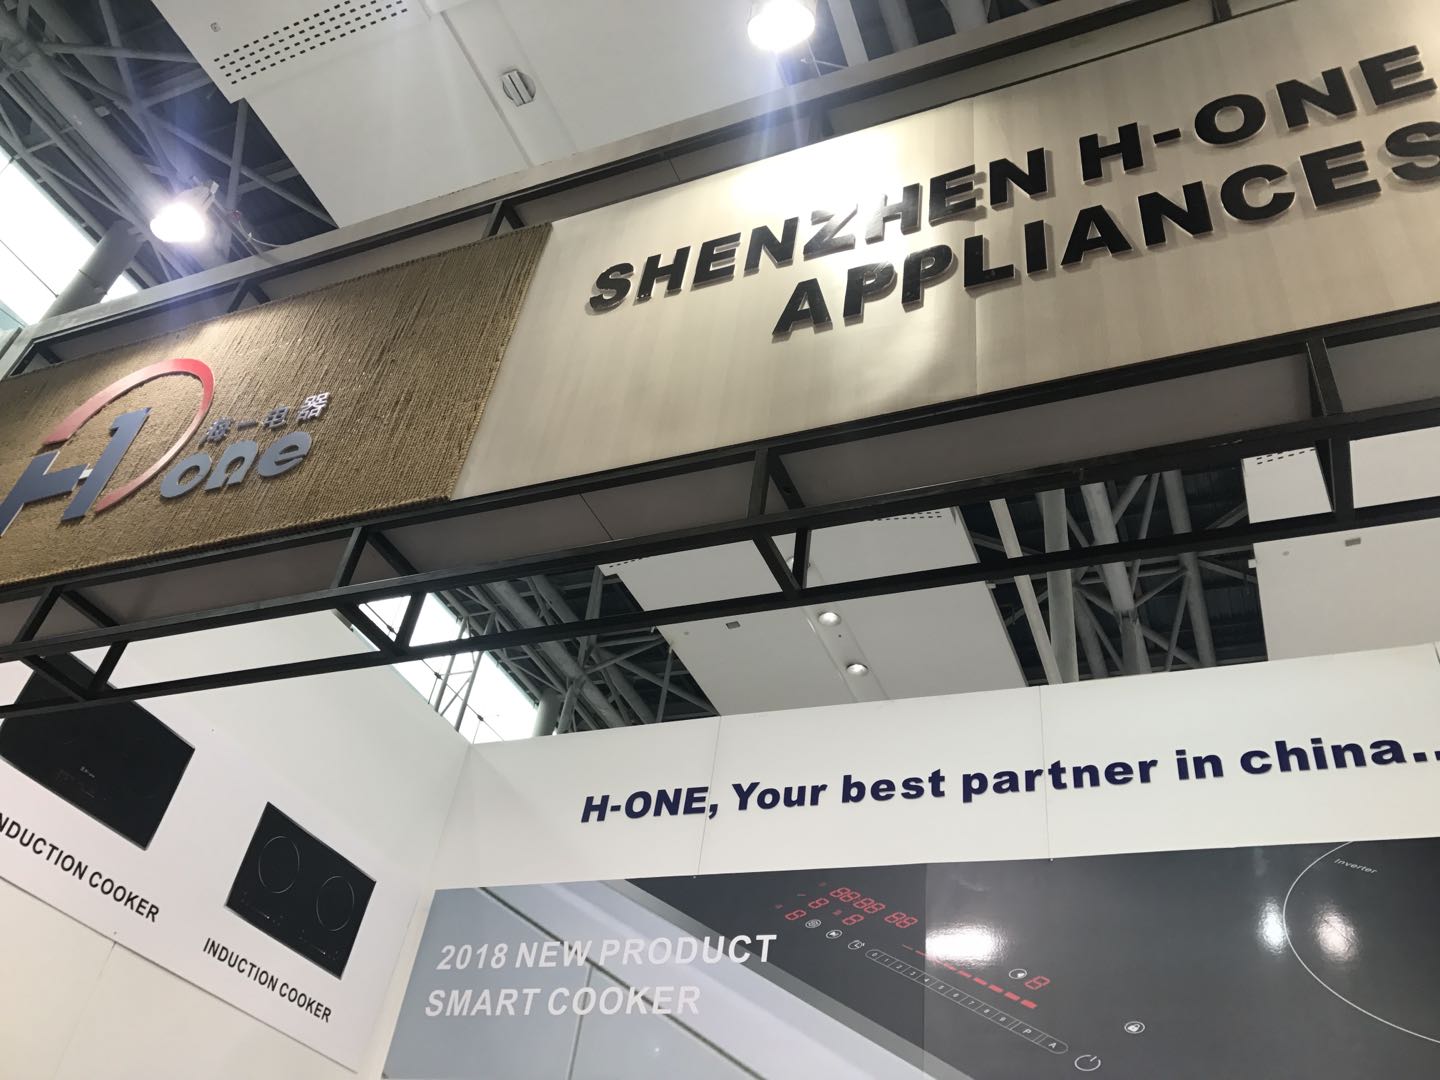 China Shenzhen H-one Home Appliances ODM Trade Show Canton Fair manufacturers - H-one